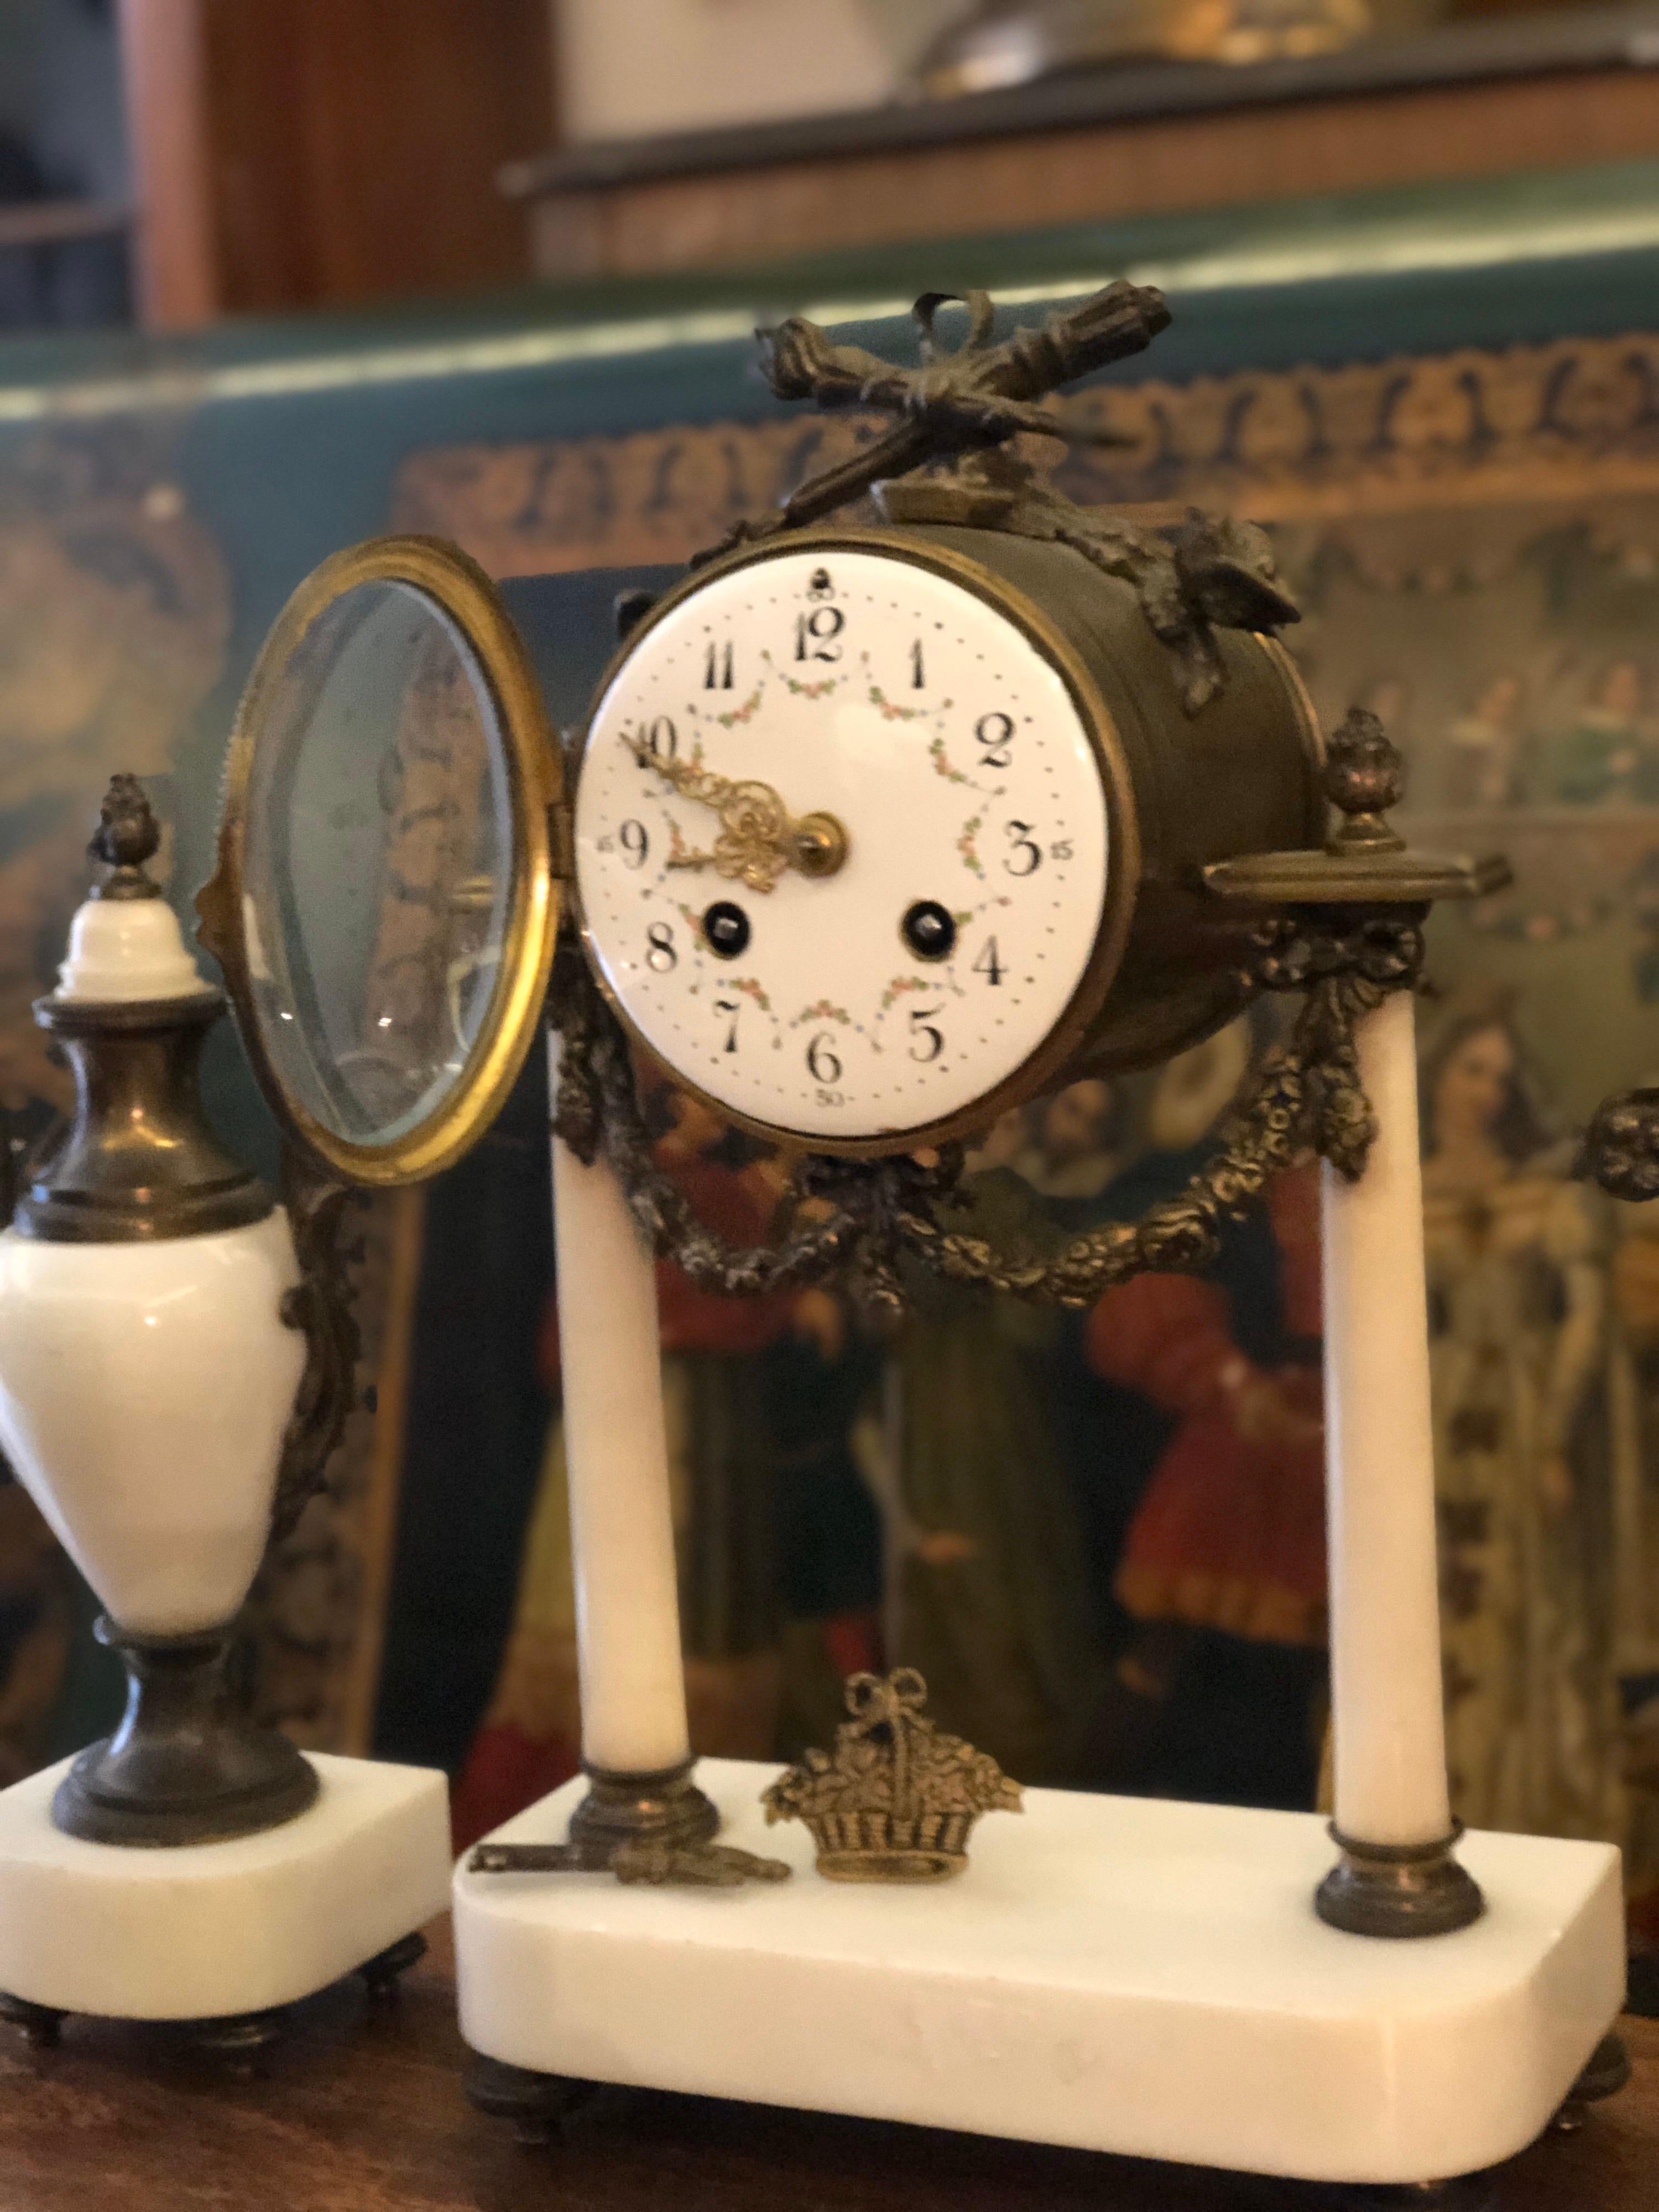 Elegant mantel clock in very good condition with front glass and rich bronze decoration in Louis XVI style, having hand painted porcelain front part and raised on a white marble stand. There are two identical urns surrounding the clock made in the